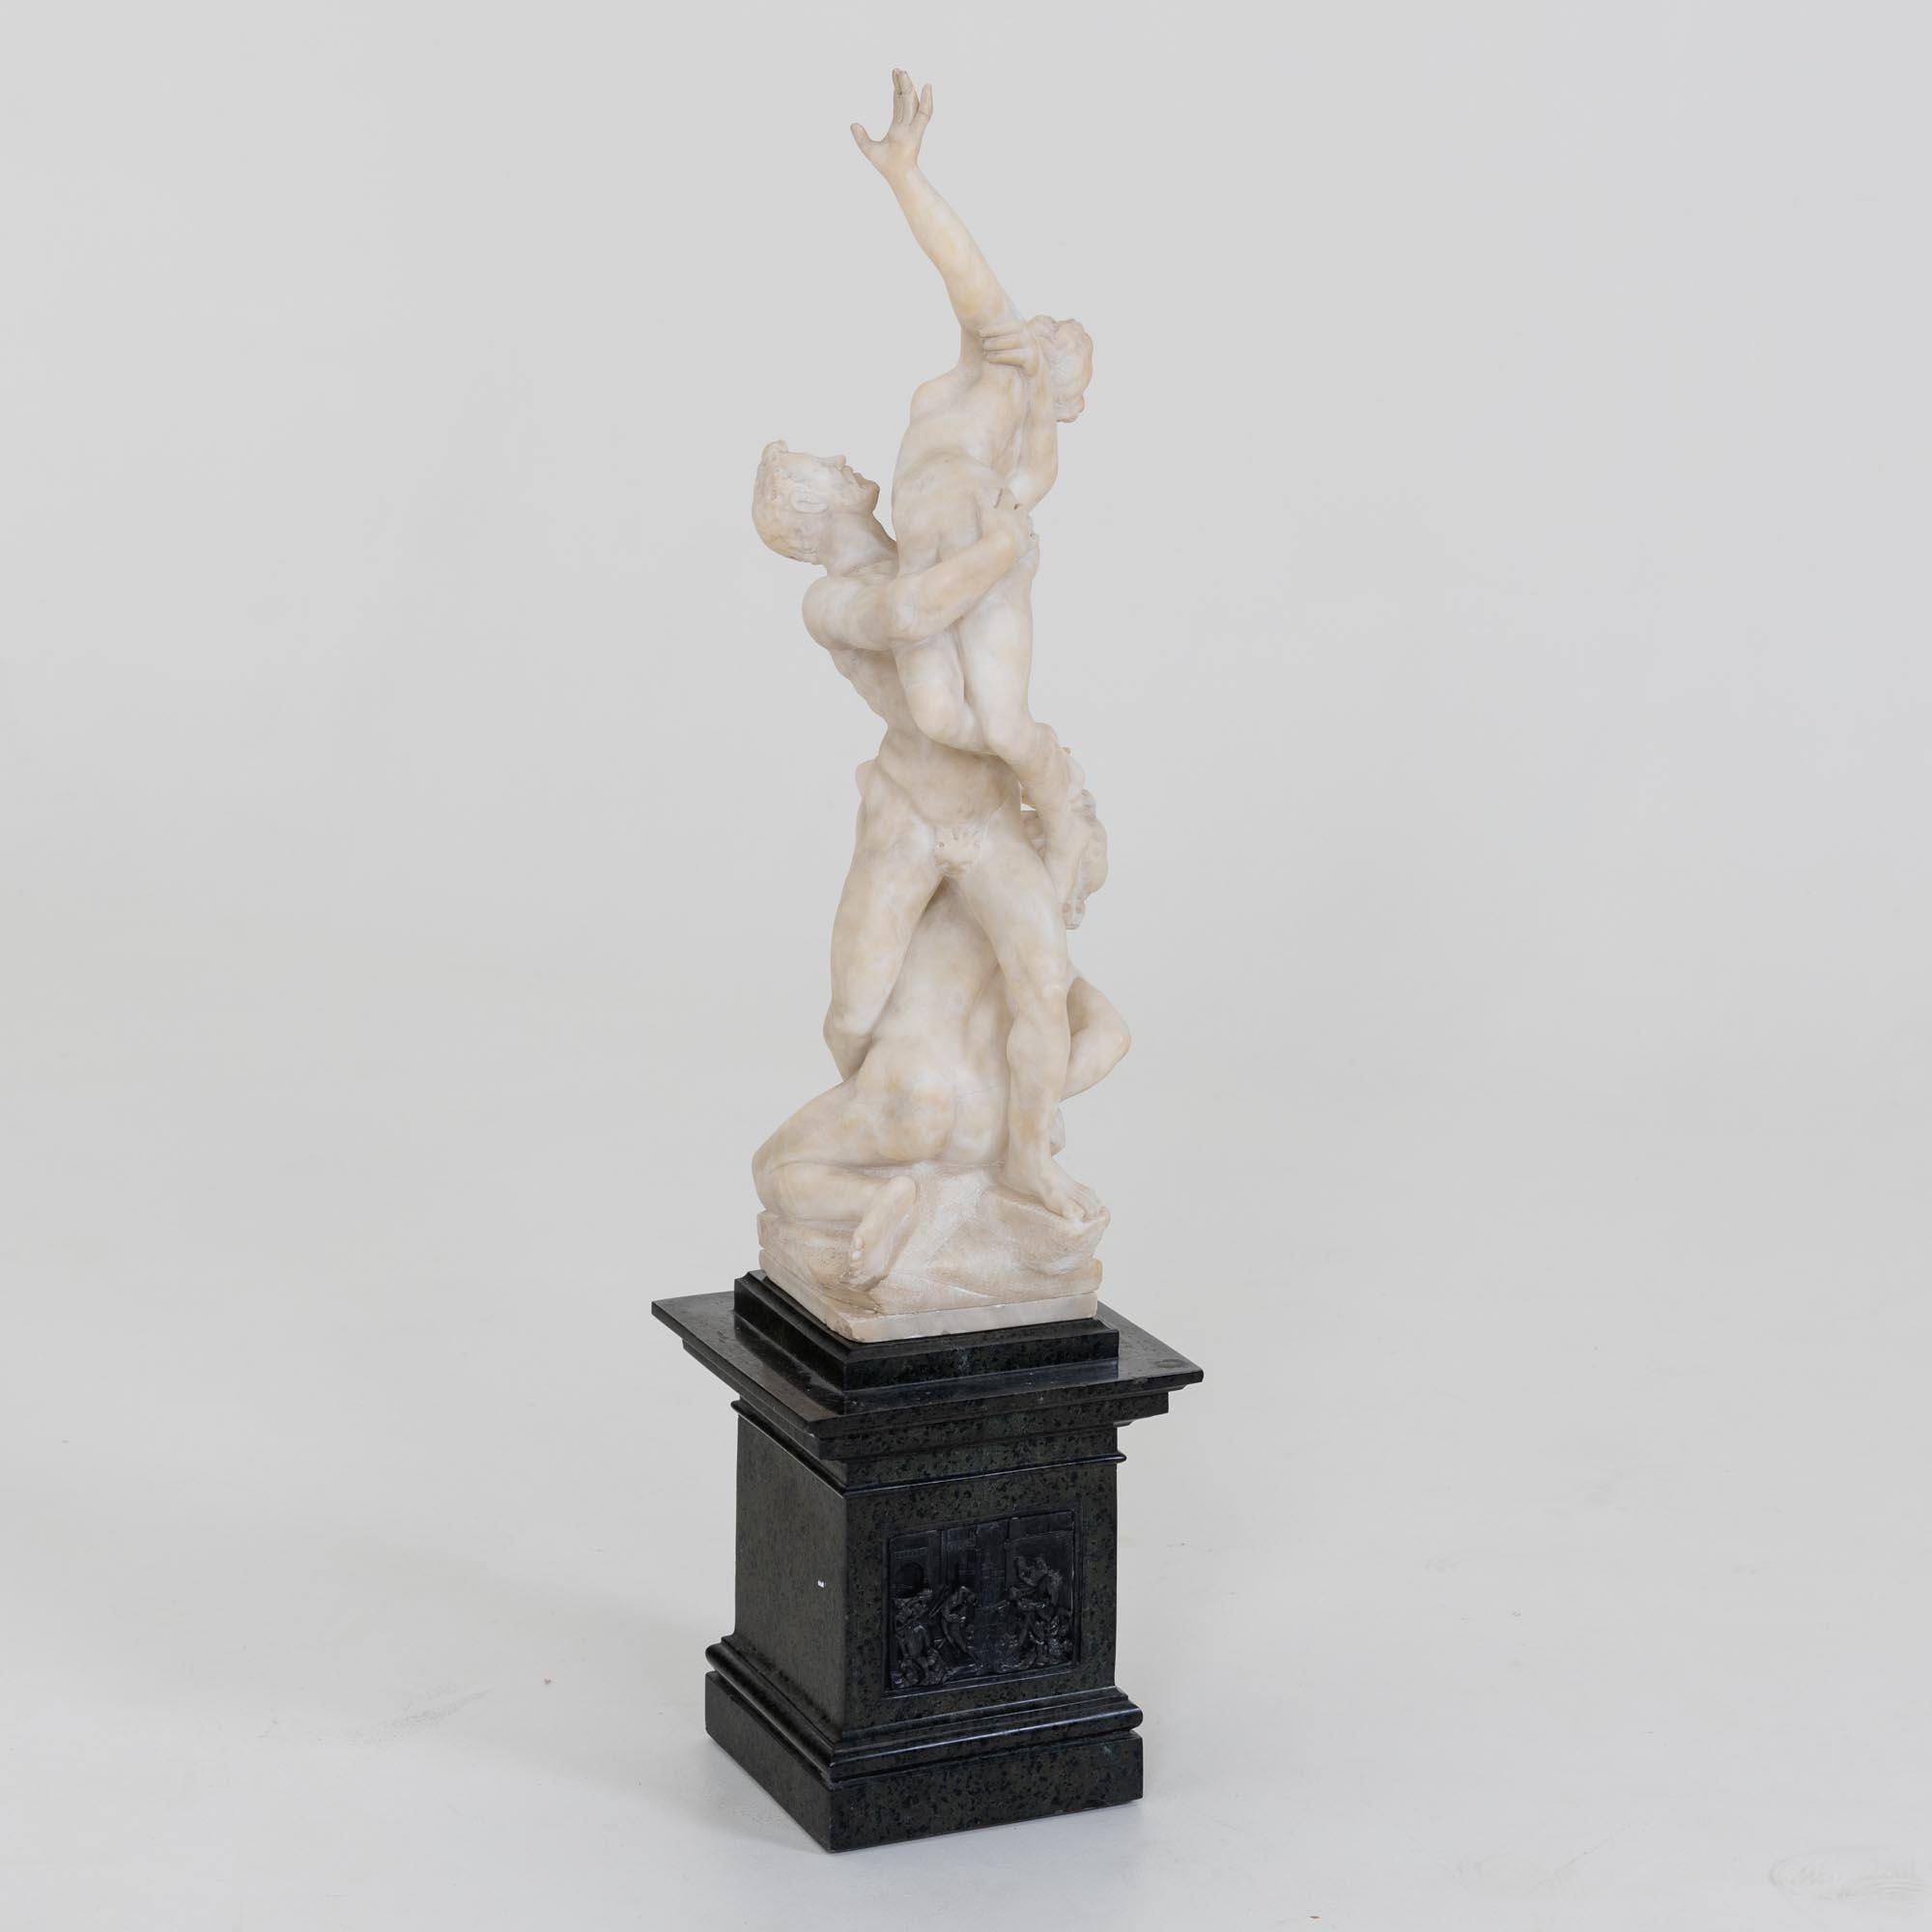 Italian Marble Sculpture Rape of the Sabine Women after Giambologna, Italy 19th century